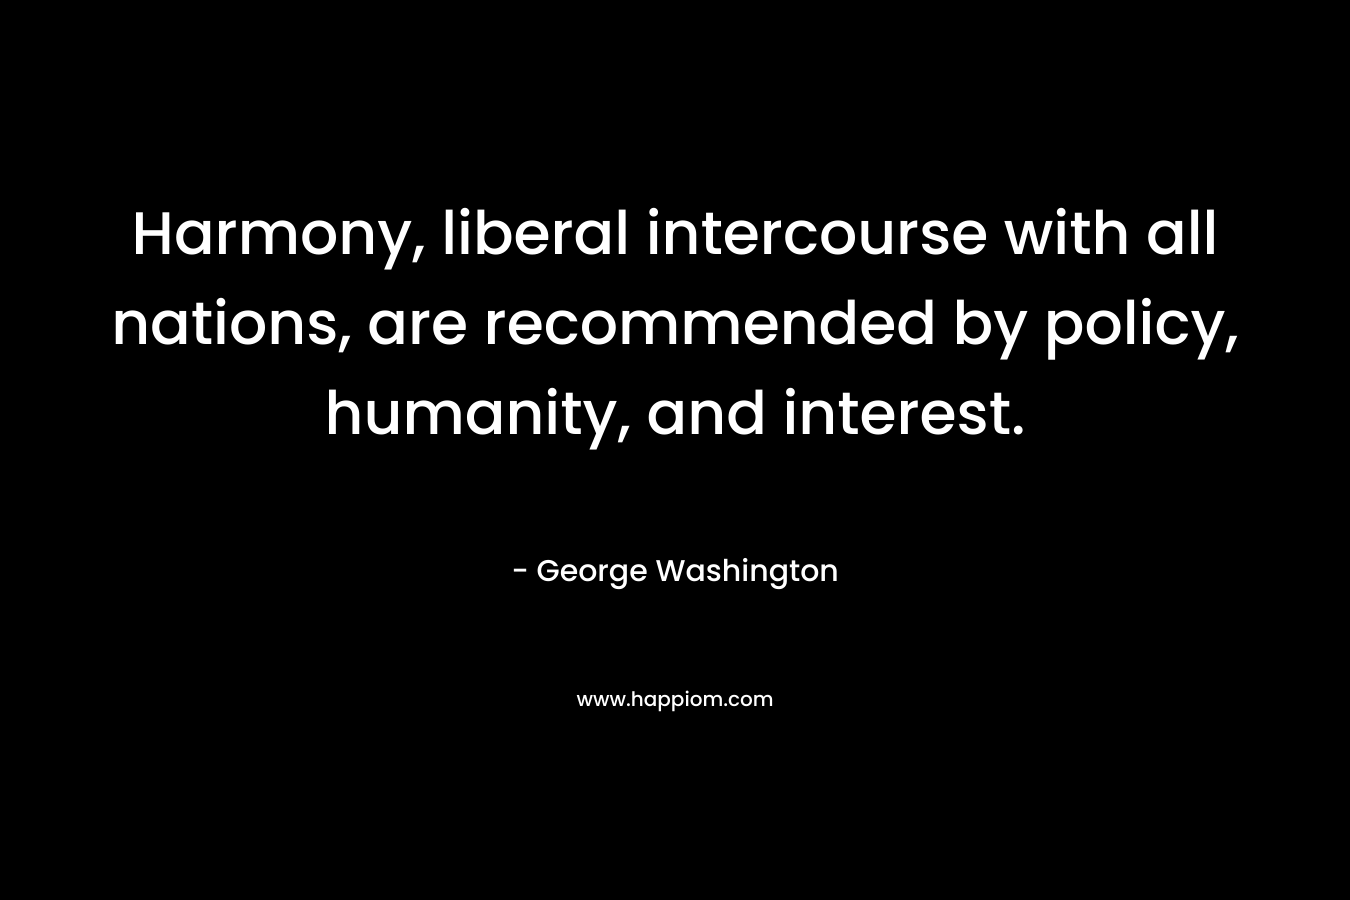 Harmony, liberal intercourse with all nations, are recommended by policy, humanity, and interest.